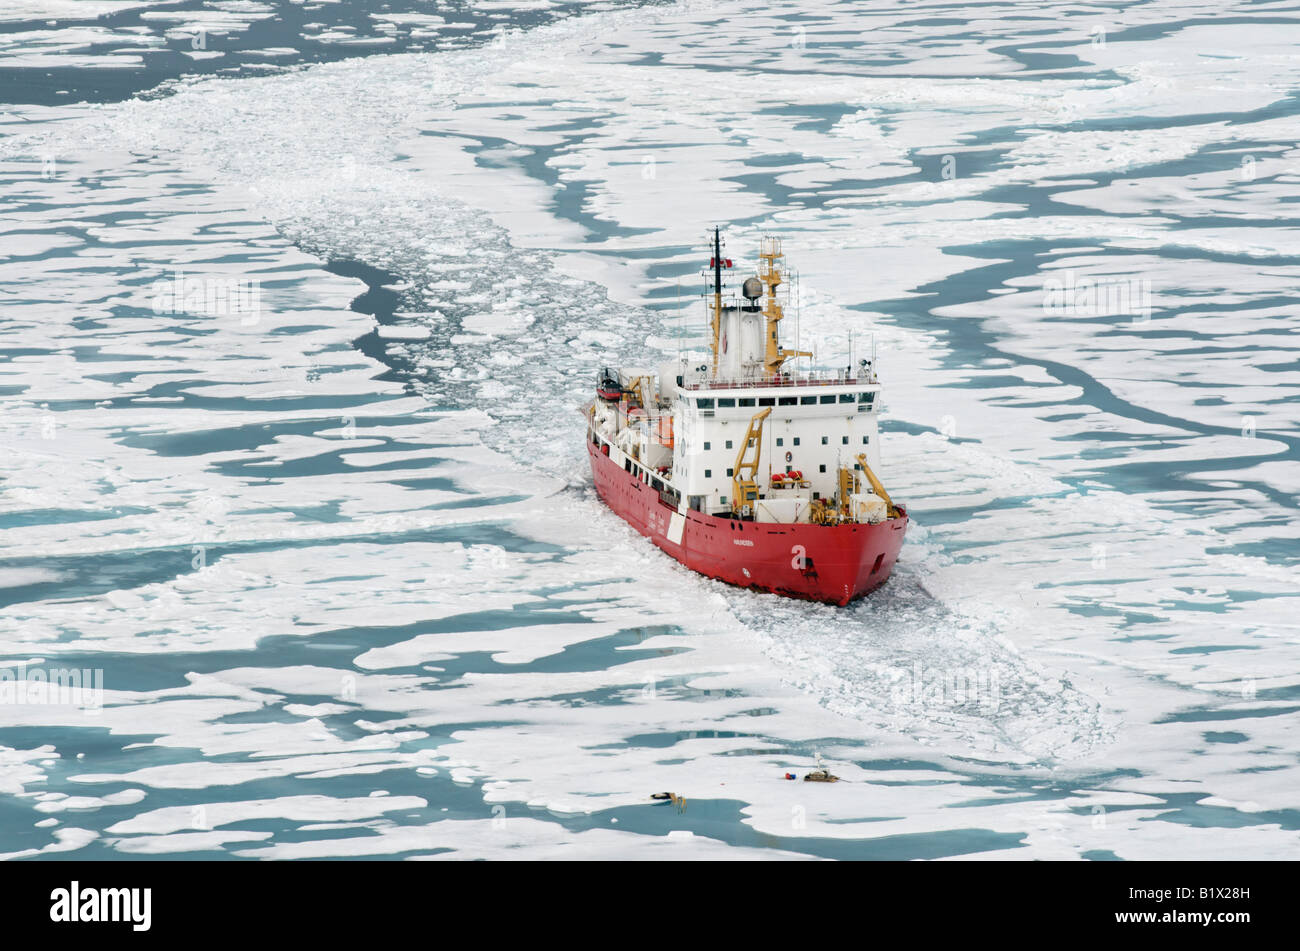 Canadian Coast Guard icebreaker and Arctic research ship CCGS Amundsen.  Seen in the Amundsen Gulf.  Spring time ice. Stock Photo